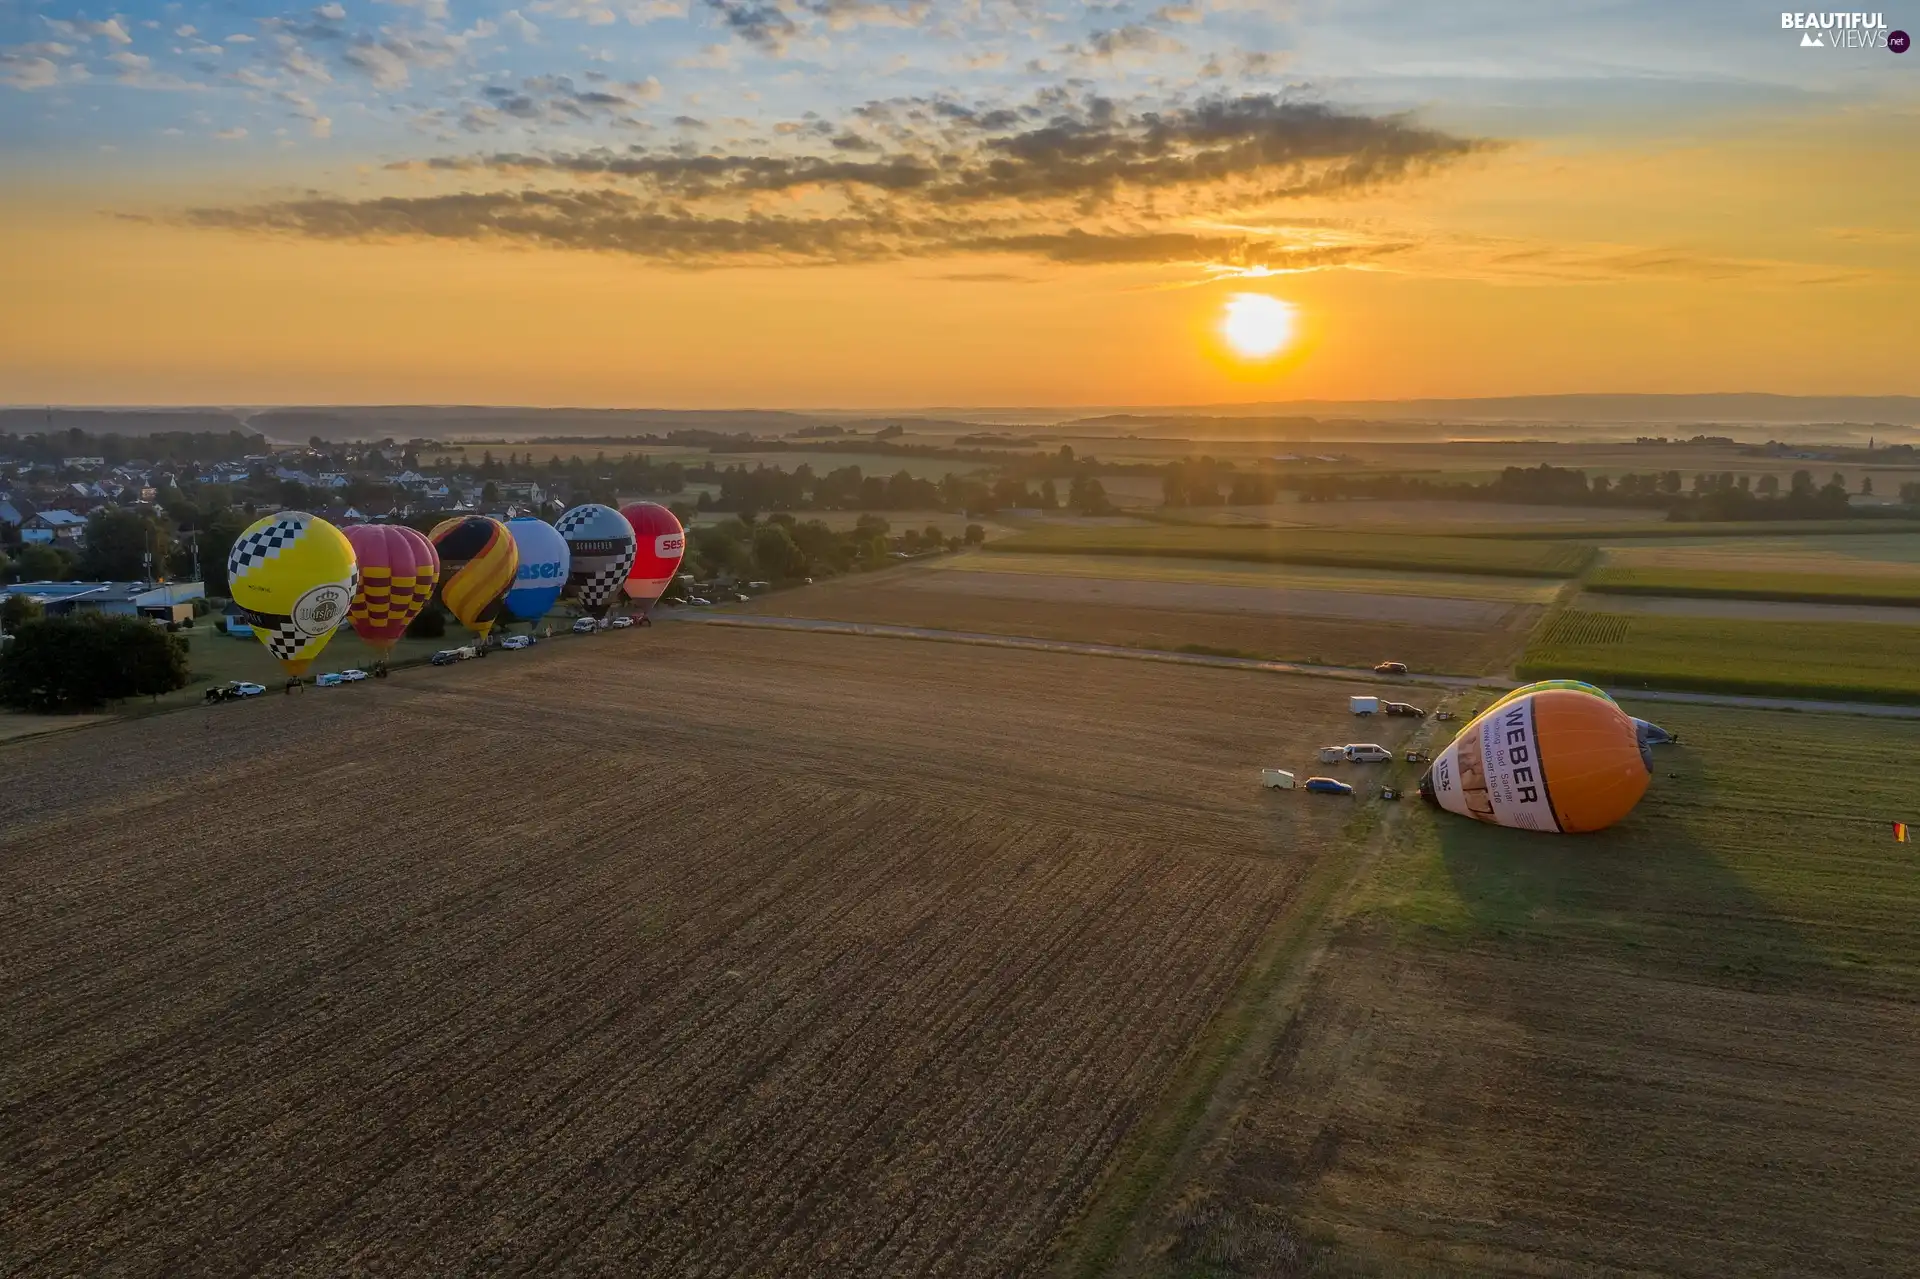 viewes, Sunrise, Field, trees, Balloons